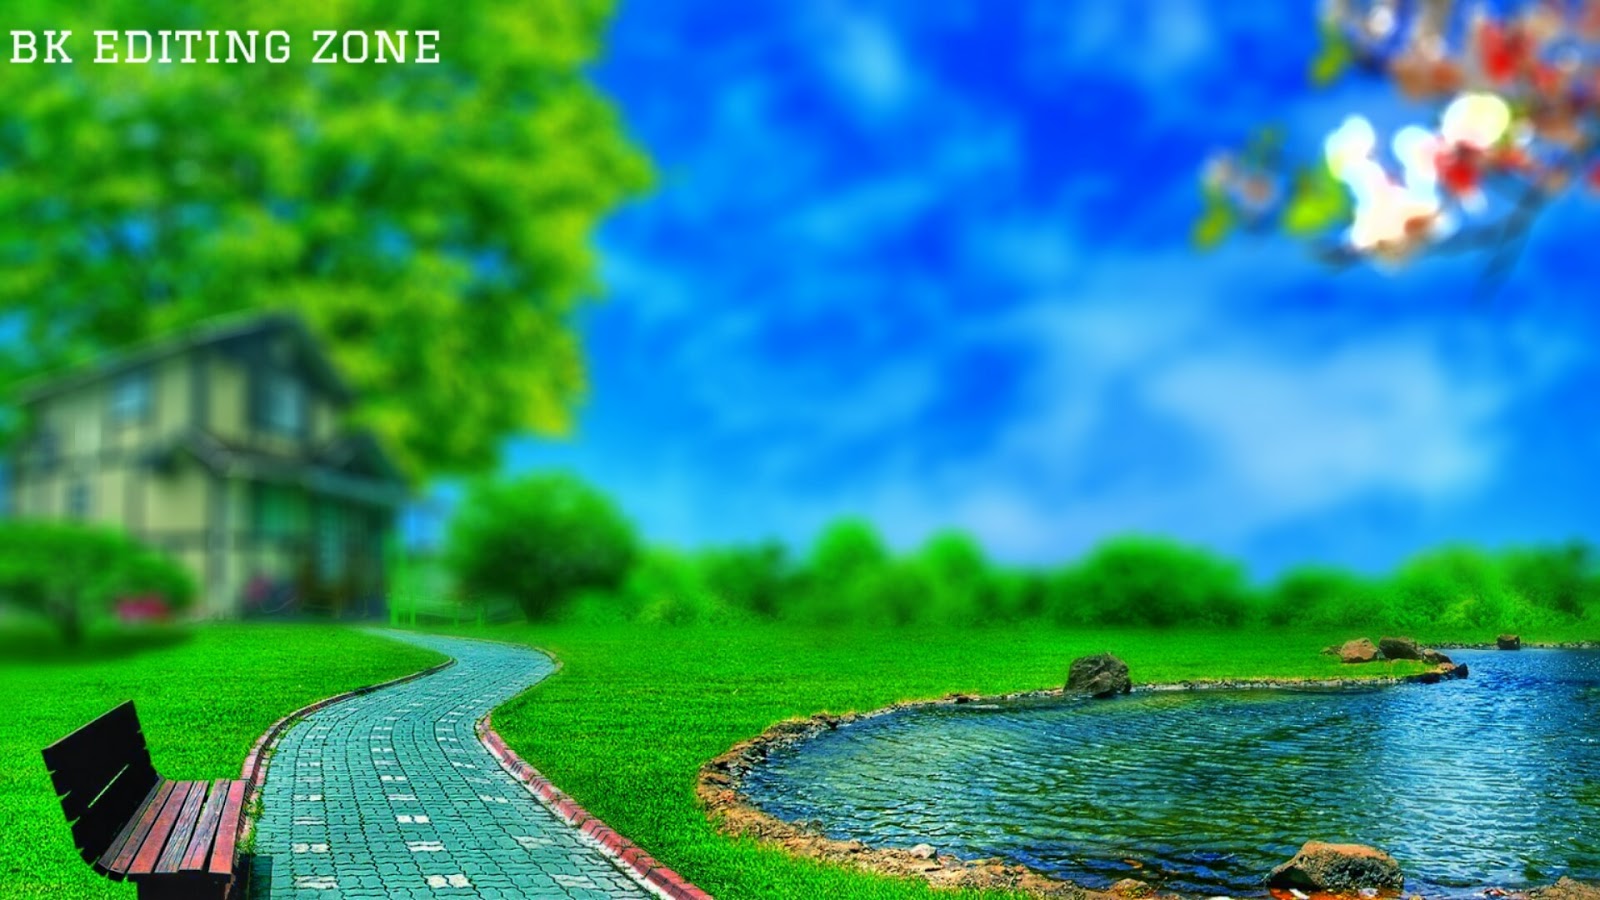 New Bk Edit Hd Background Bk Editing Zone - Background For Photo Editing Hd - HD Wallpaper 